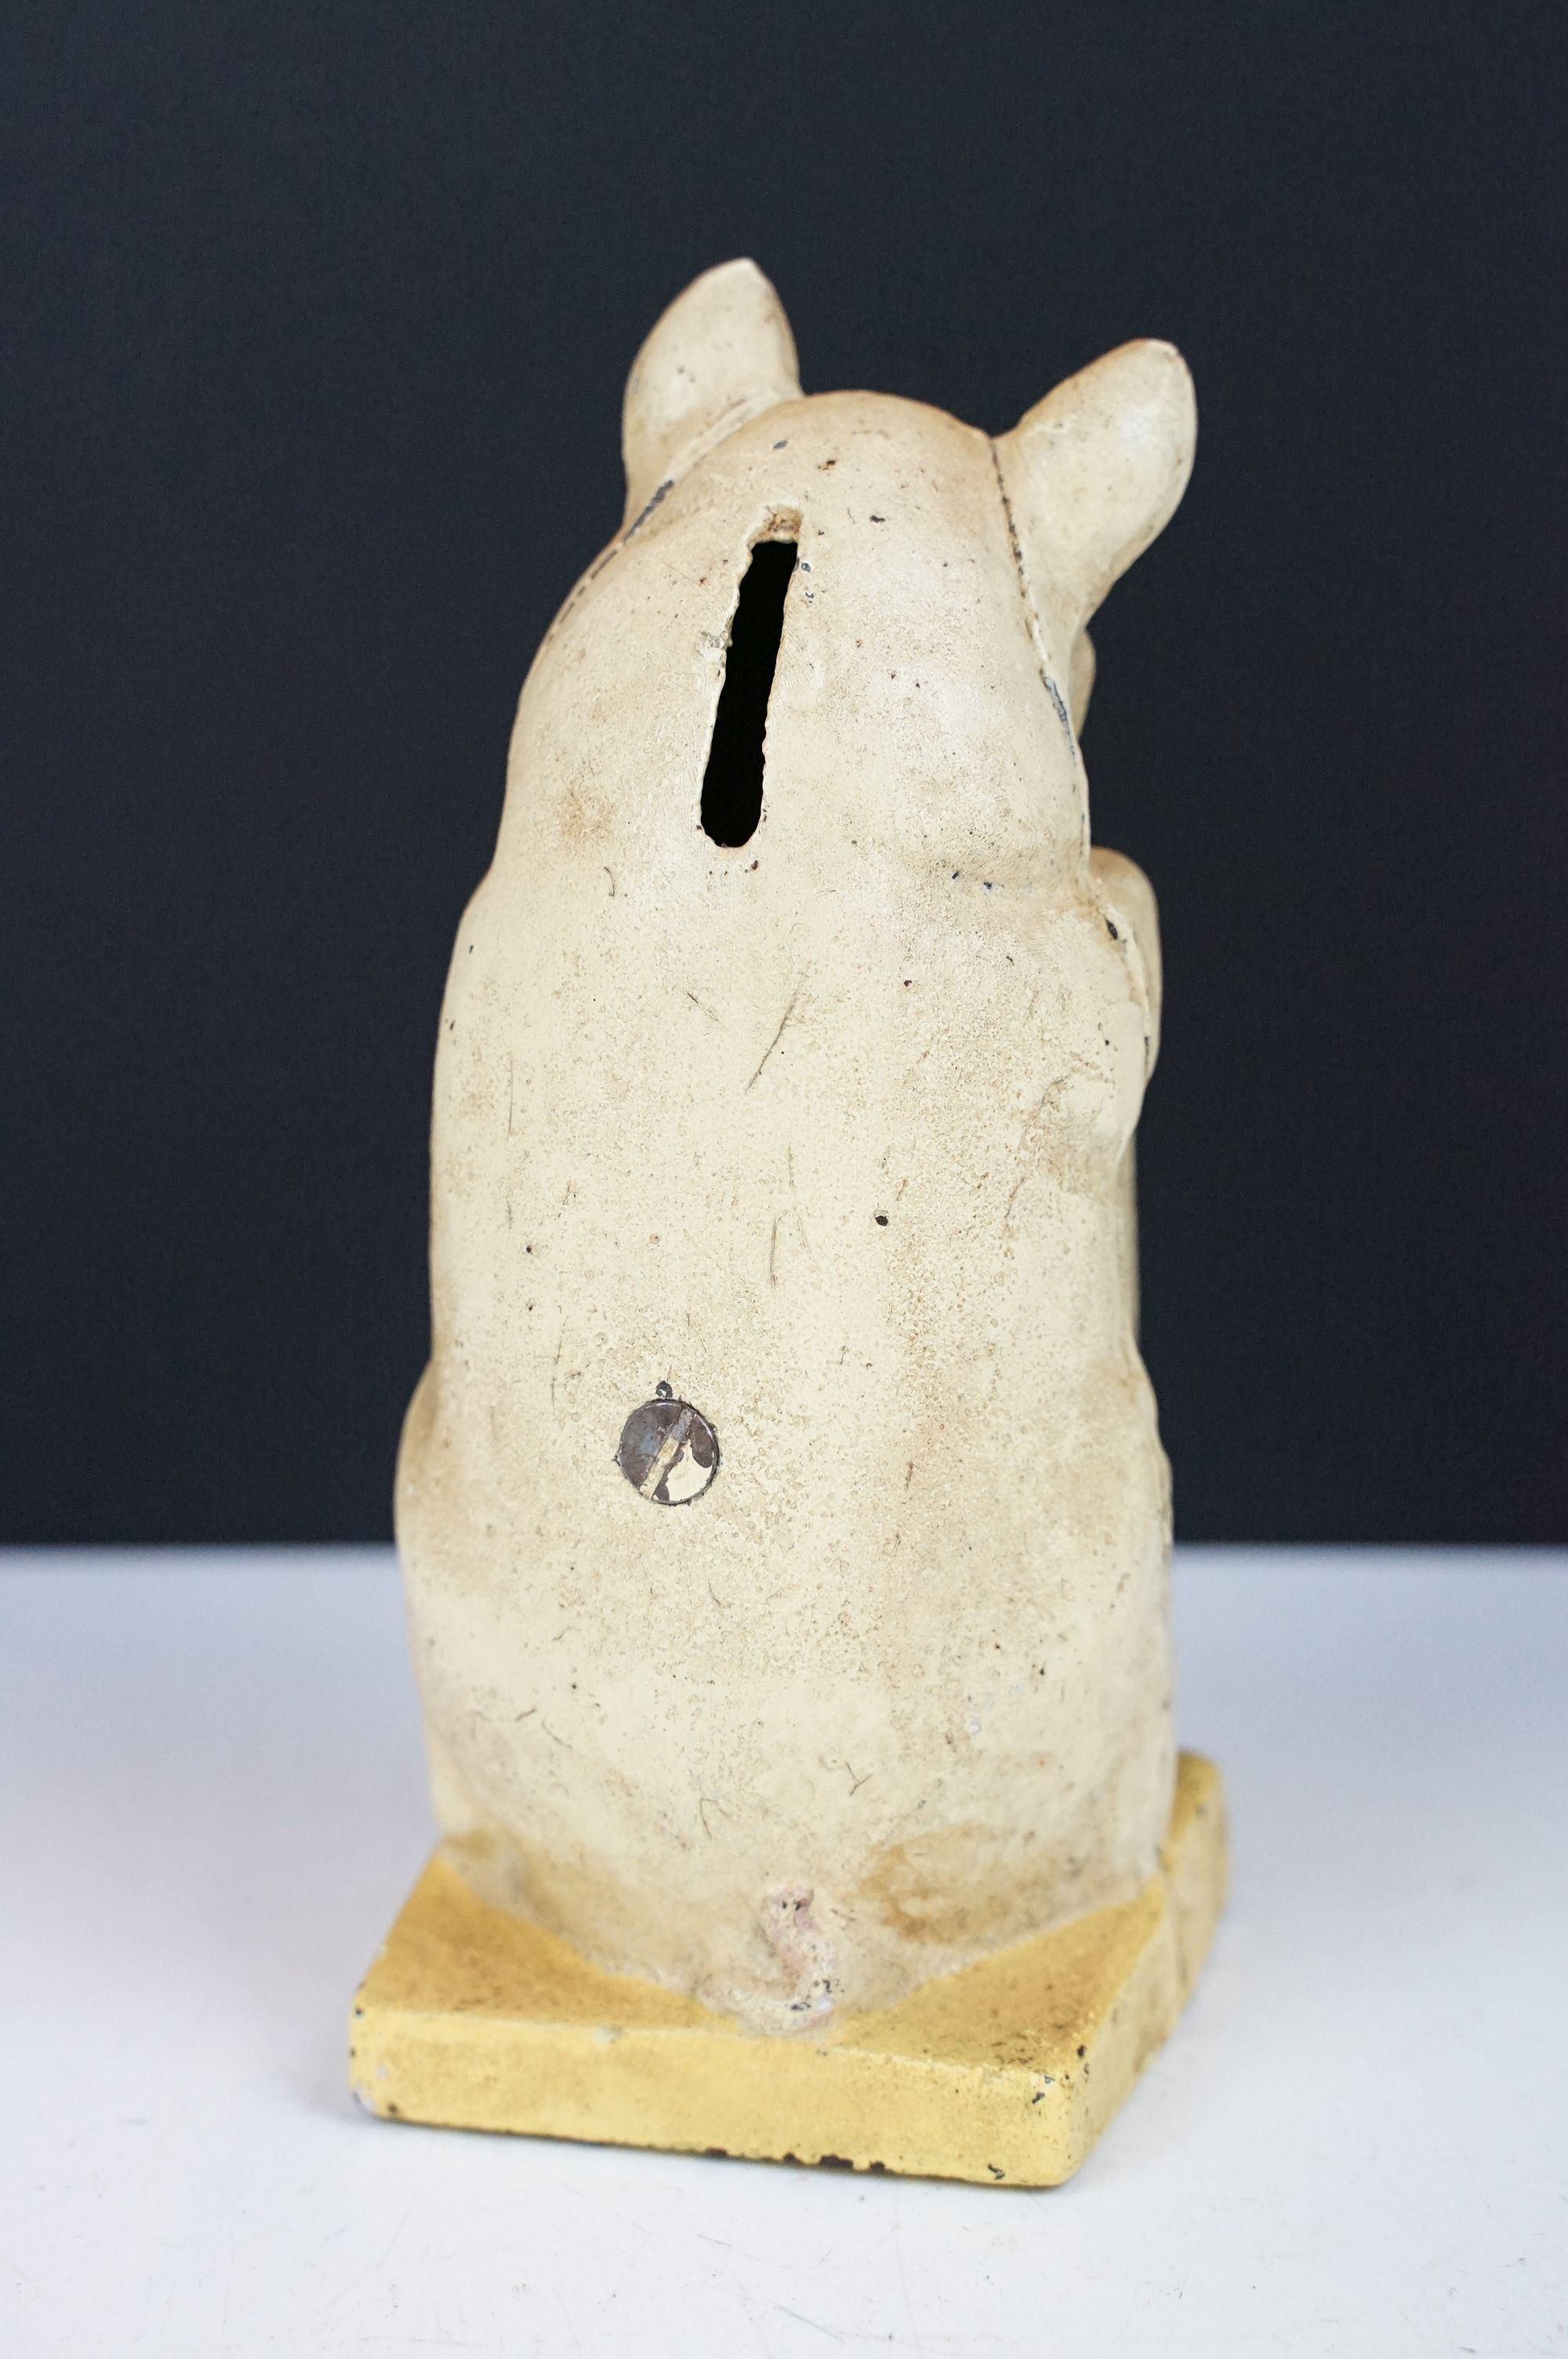 Vintage cast iron ' Thrifty ' money savings bank modelled as a pig, approx 16cm tall - Image 5 of 6